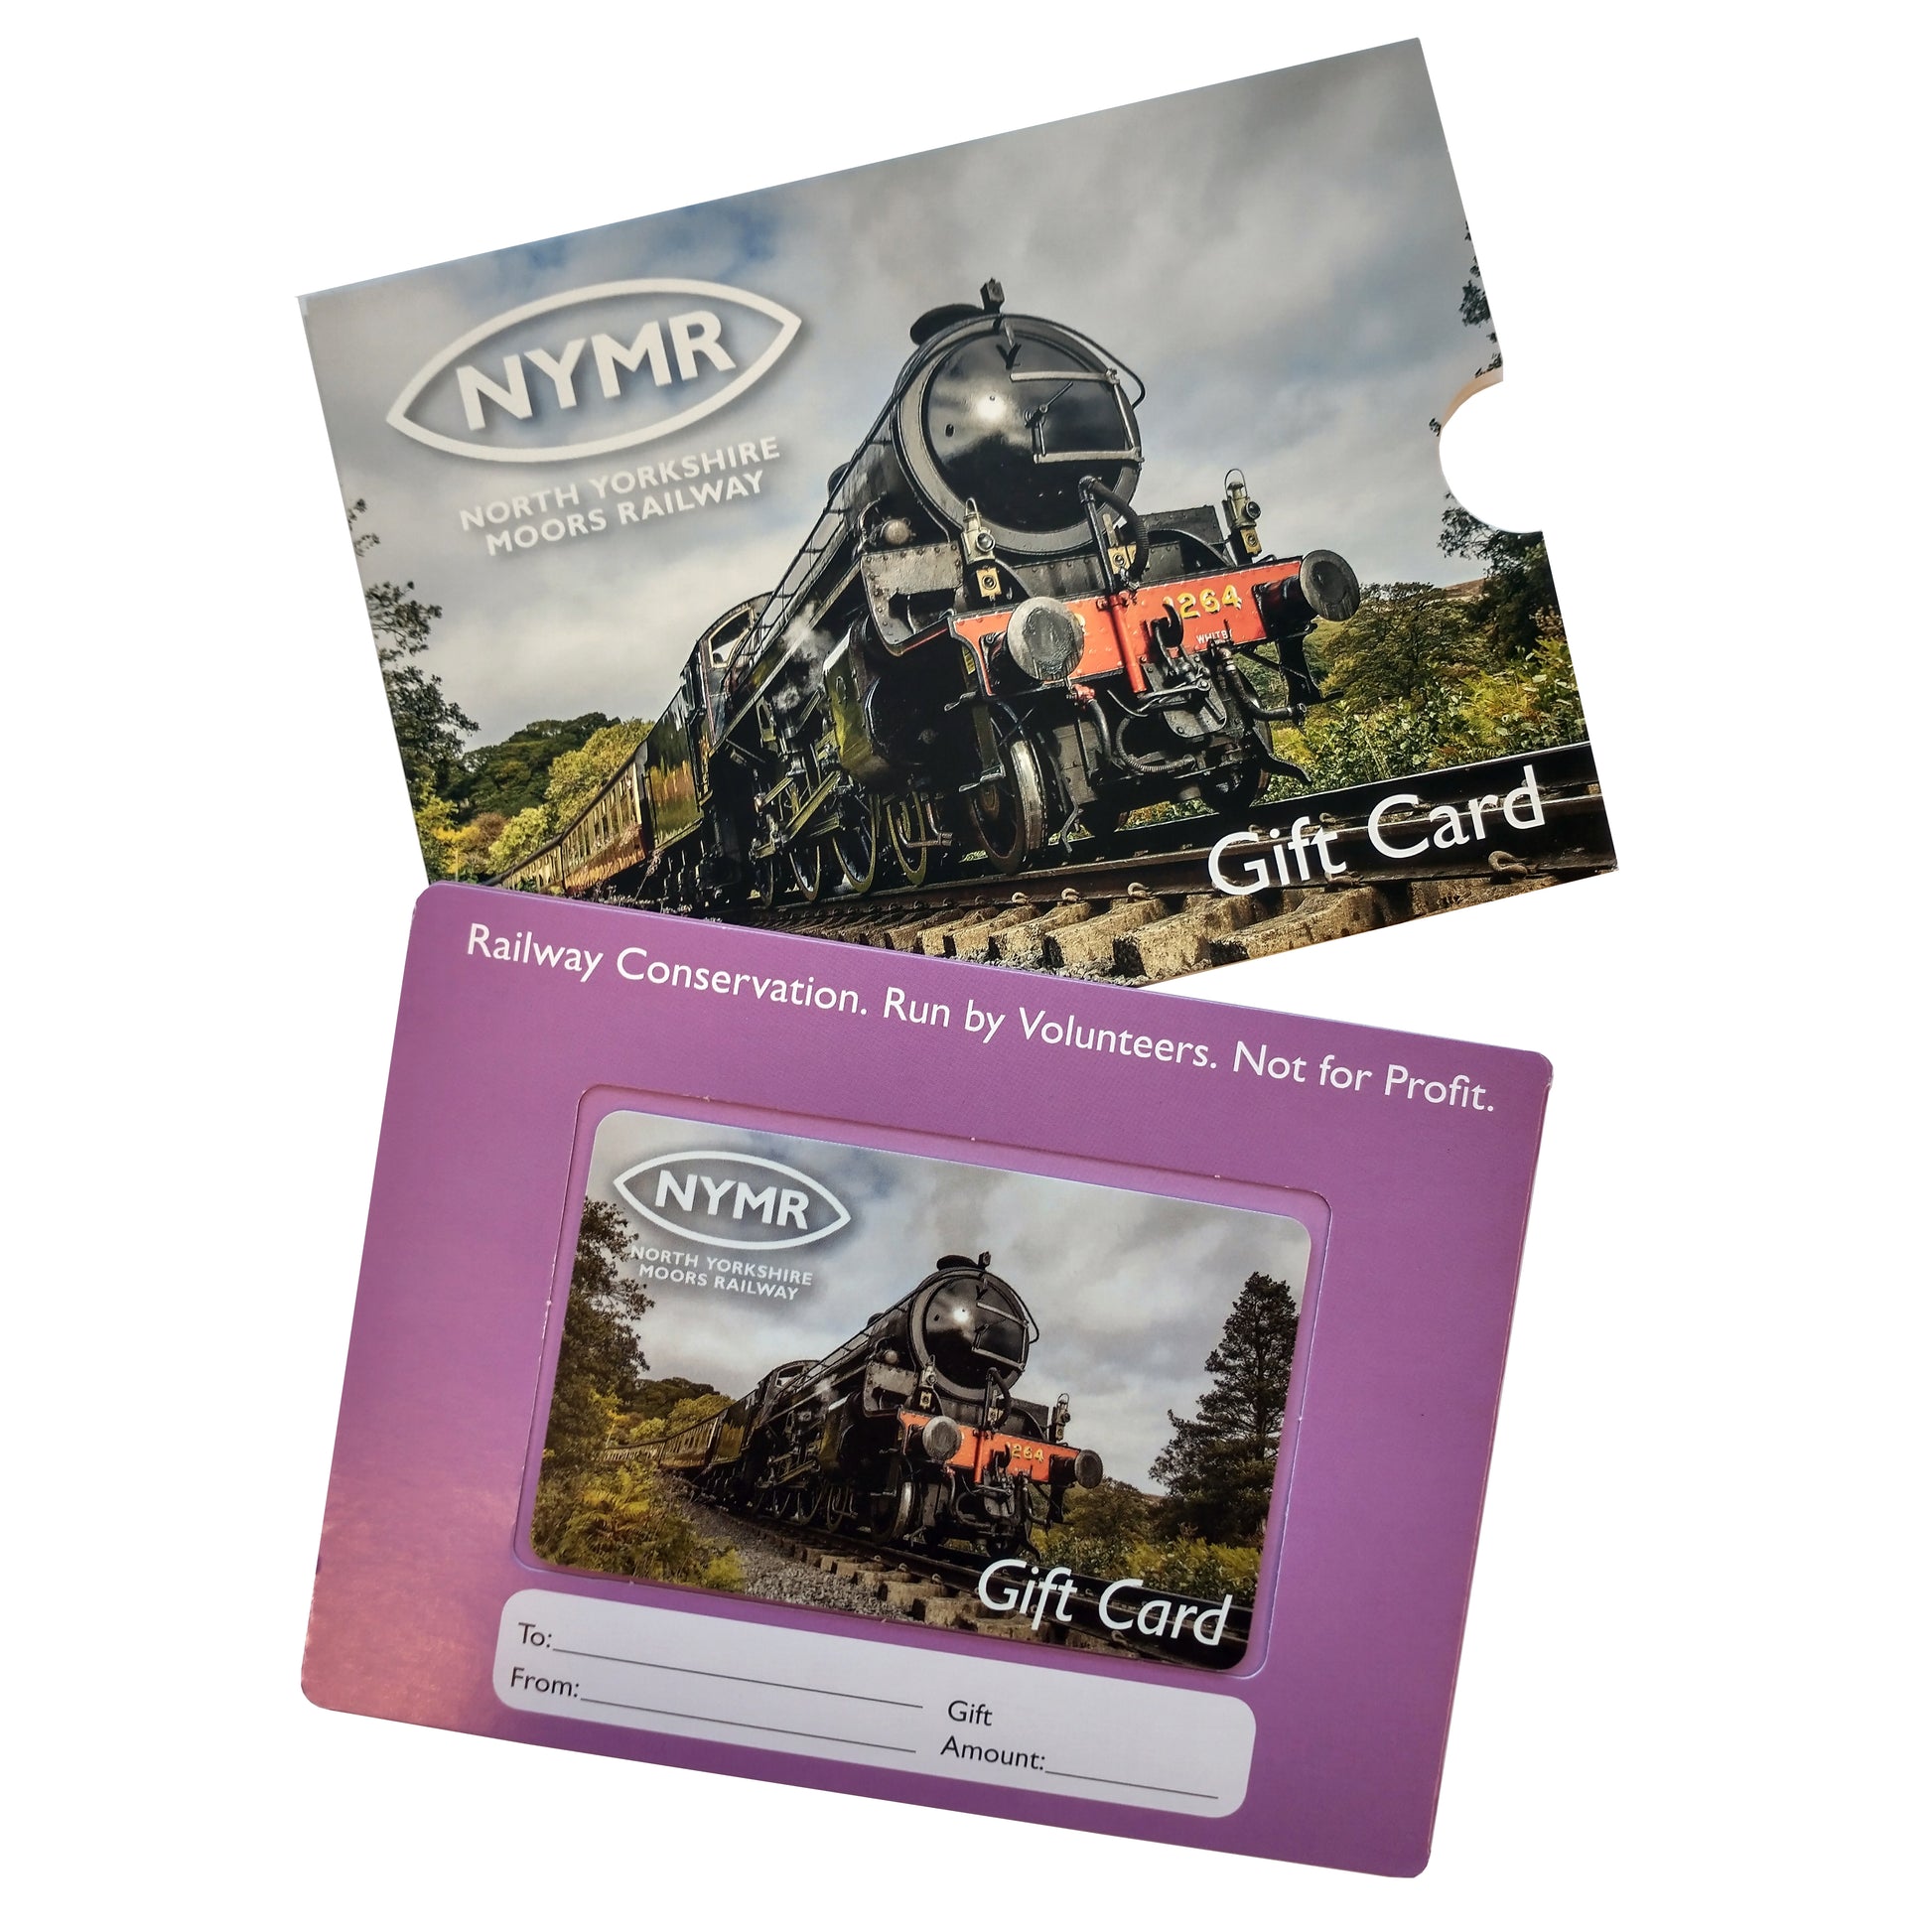 Gift card and sleeve with photo of steam engine number 1264. Card has space for to, from and gift amount to be added.